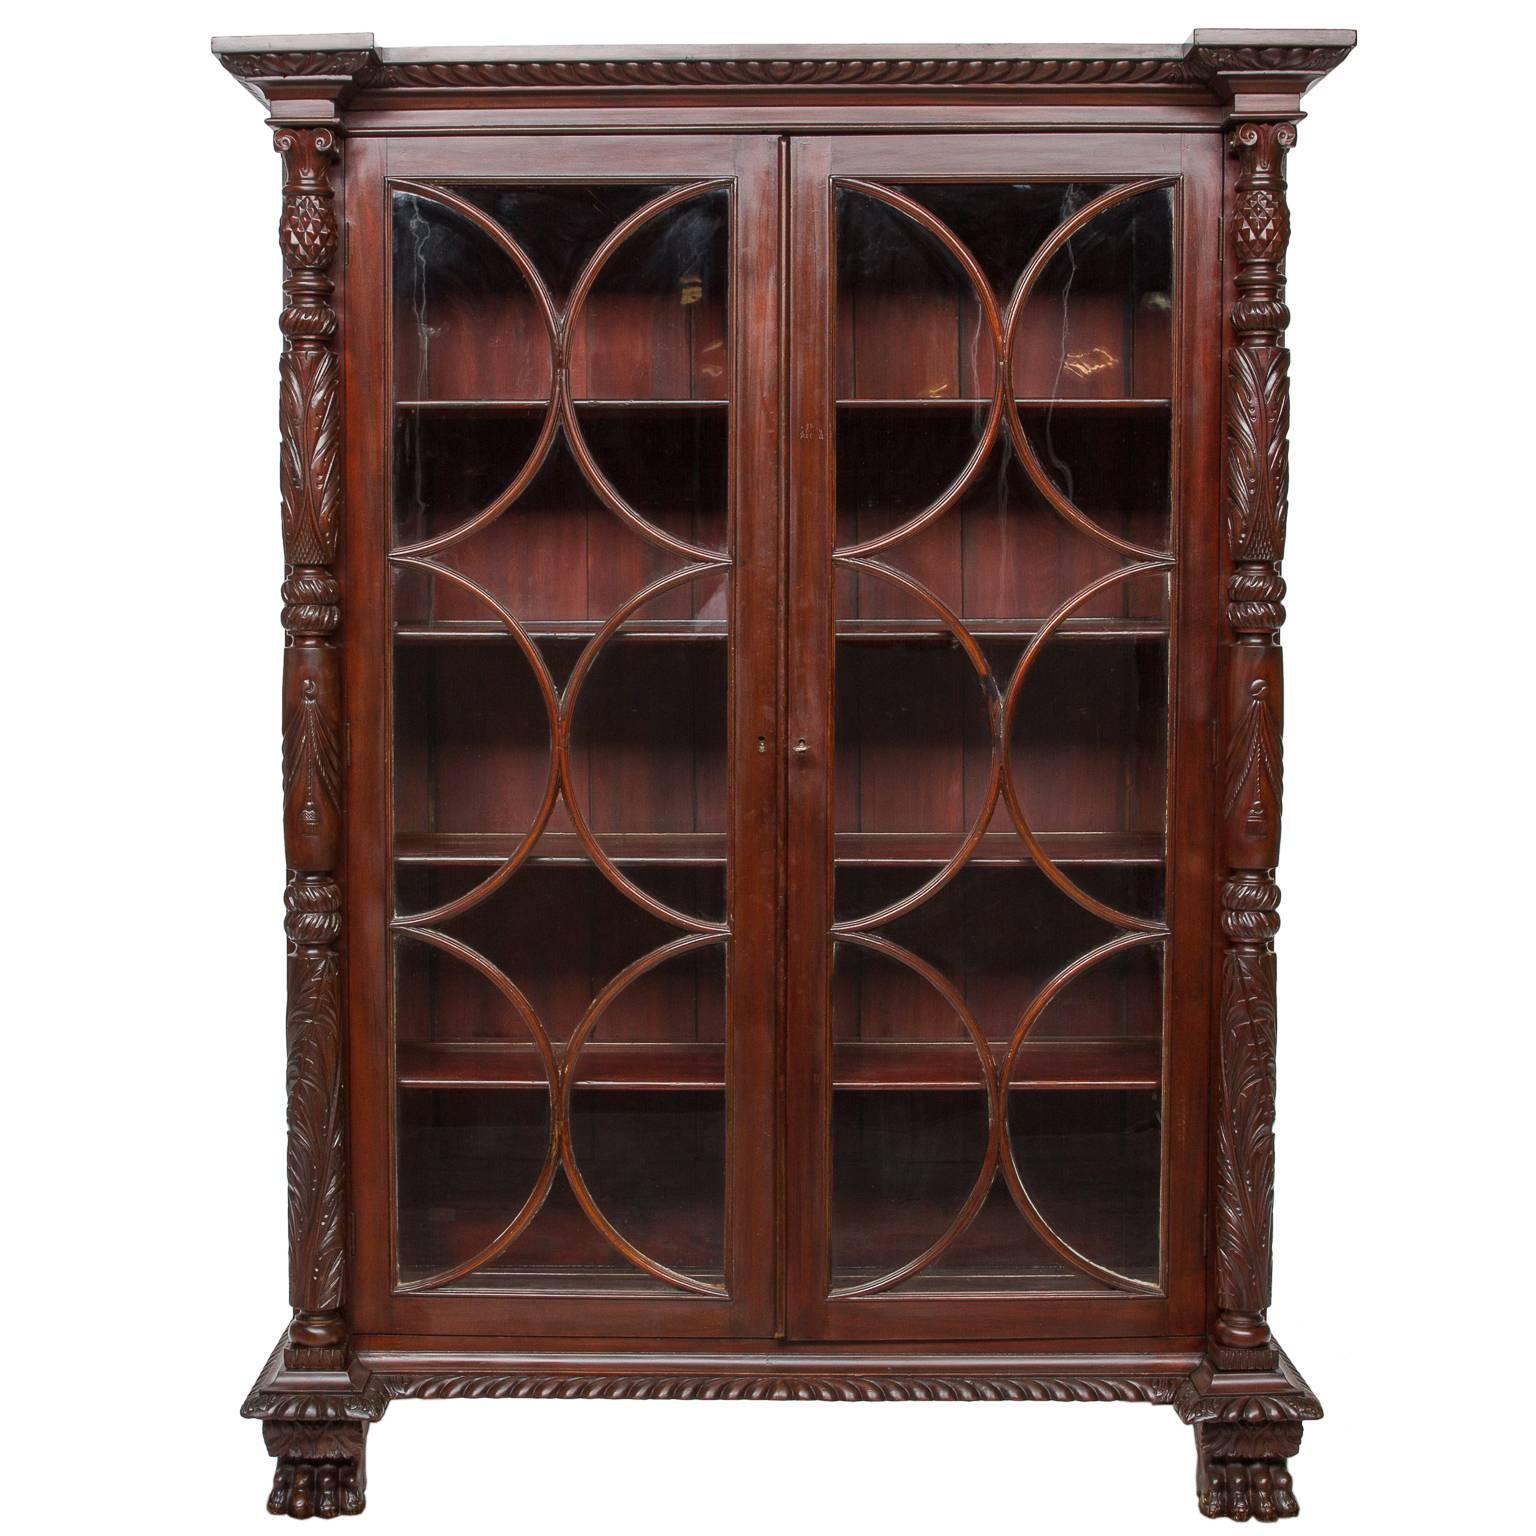 A fantastic 19th century English mahogany display cabinet. Exceptional carved columns and moldings. Distinctive sash with individual panes of glass. Original interior shelves ready for display. Carved lion paw feet. Very impressive cabinet in the